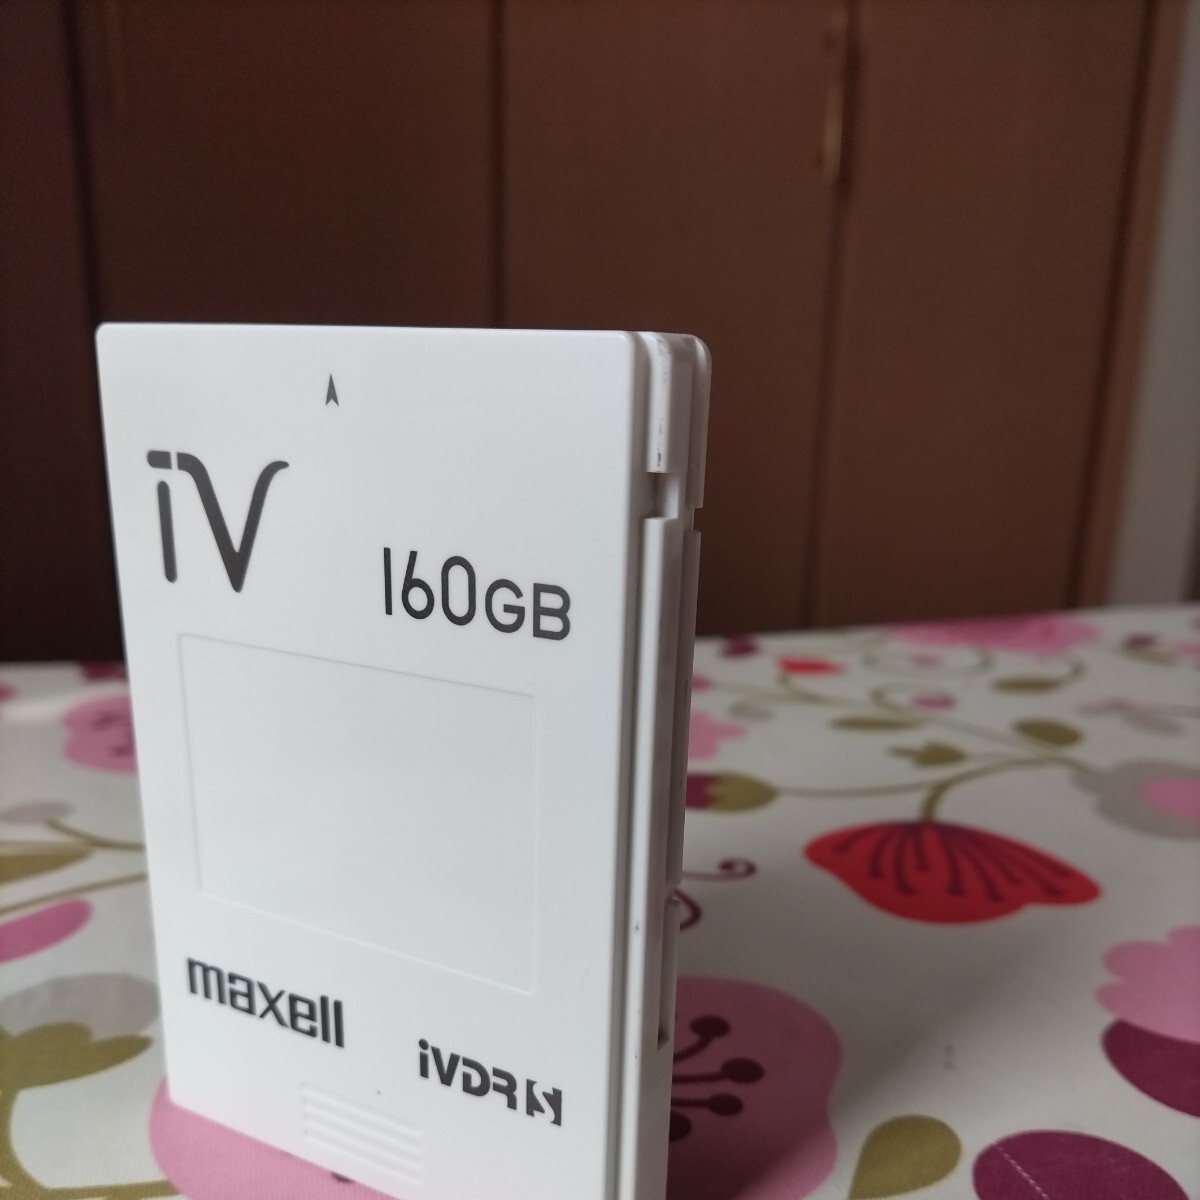 mak cell maxell IVDRS 160GB